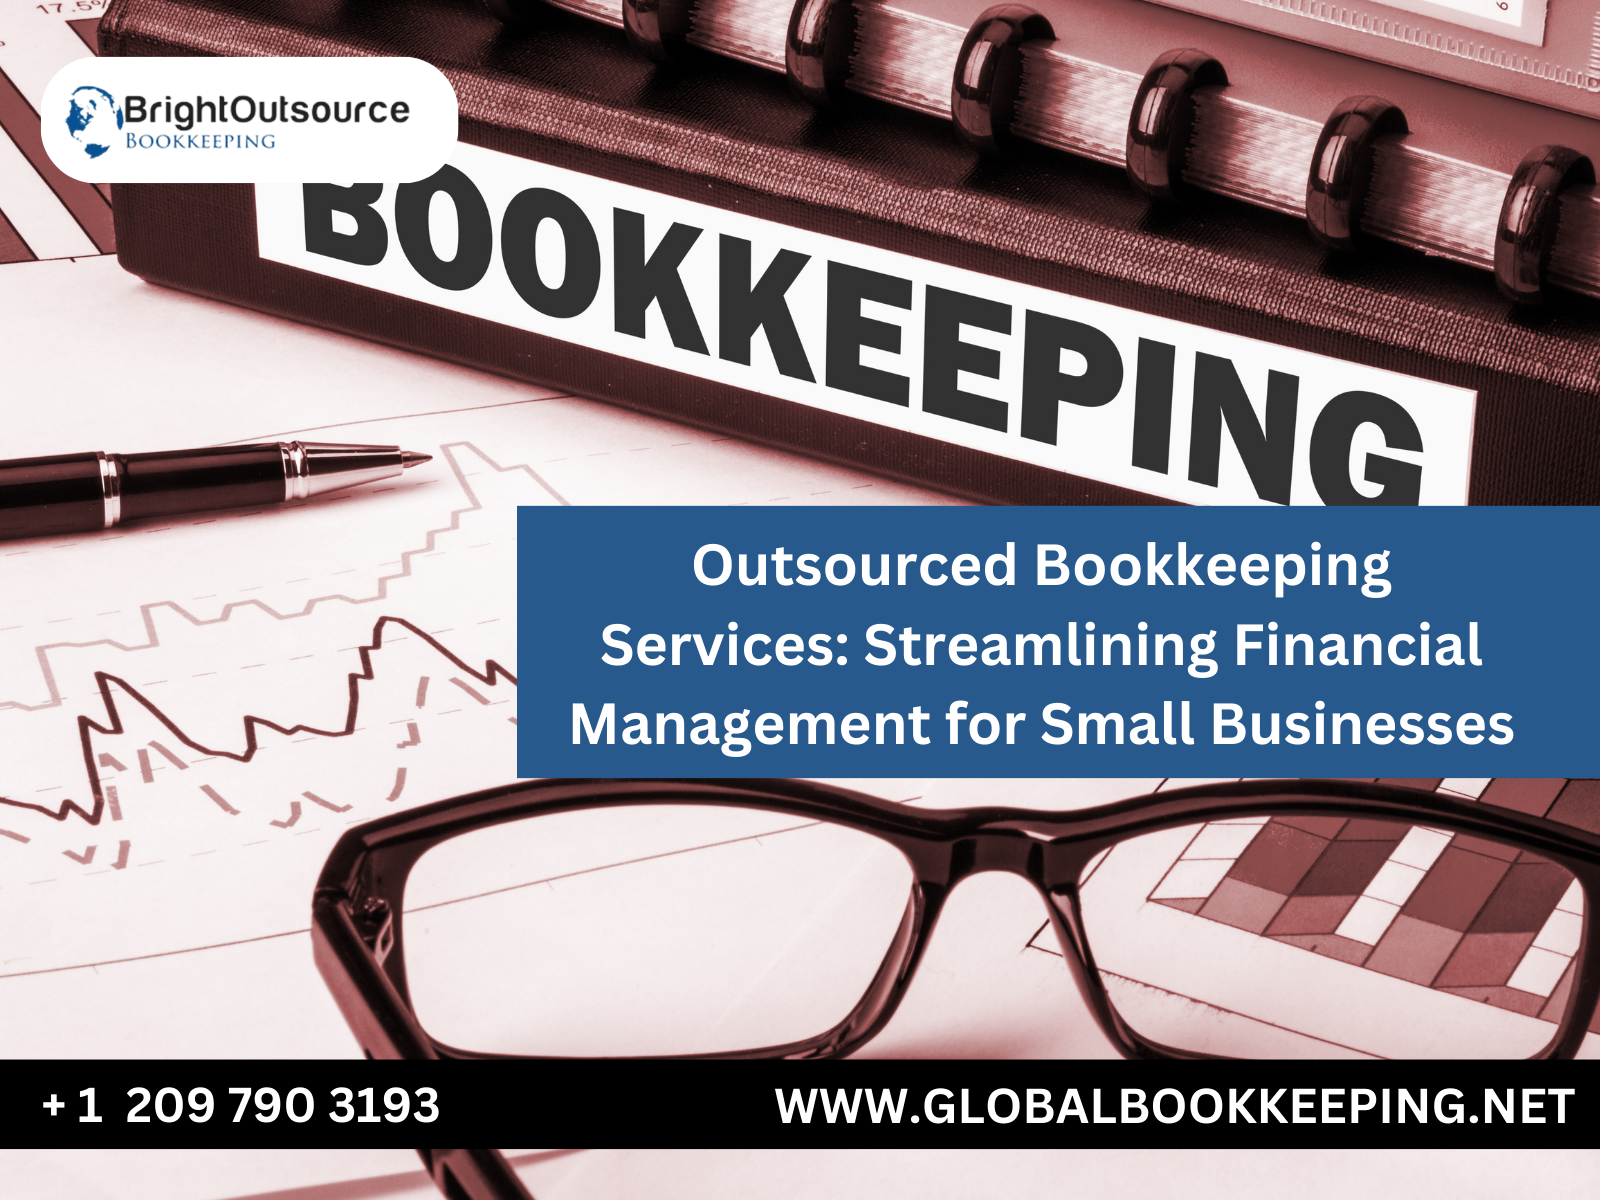 Outsourced Bookkeeping Service for Small Businesses